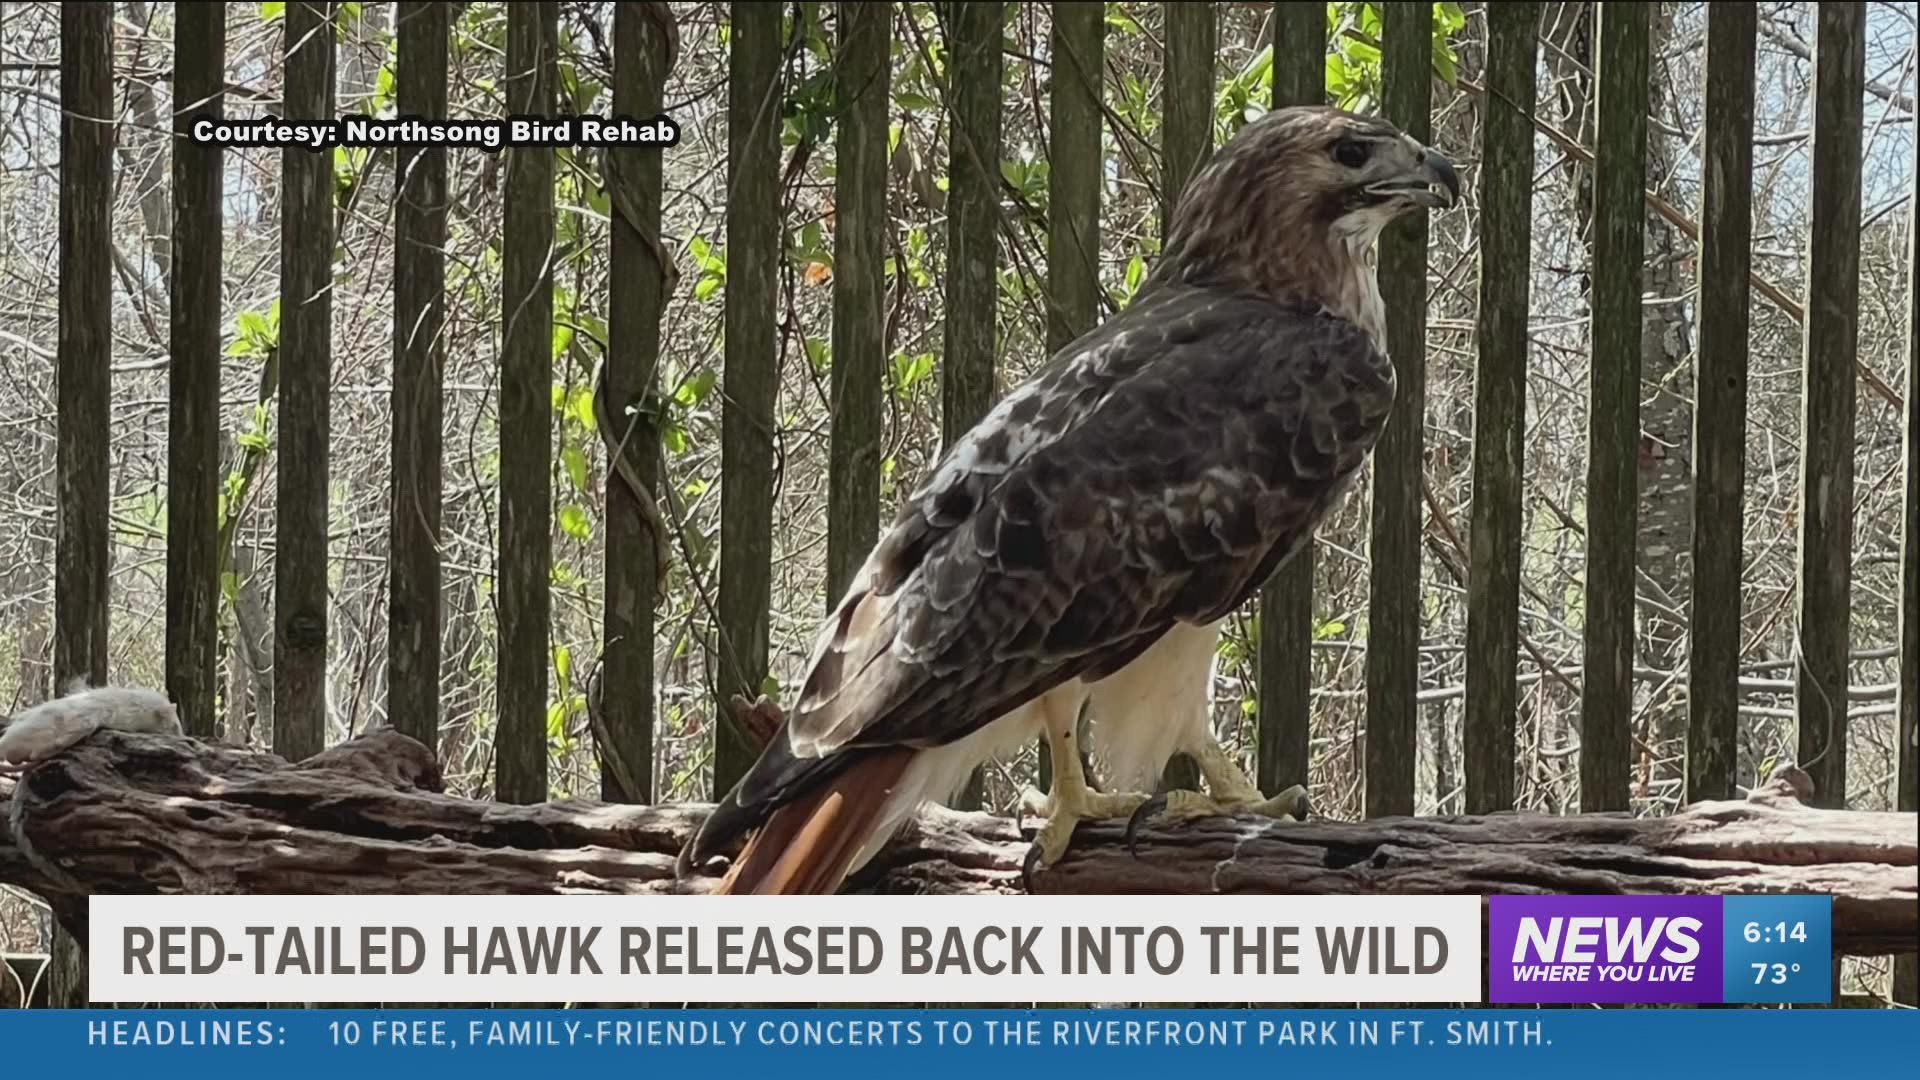 The Northsong Wild Bird Rehabilitation Center has cared for the hawk since January after it suffered a head injury.